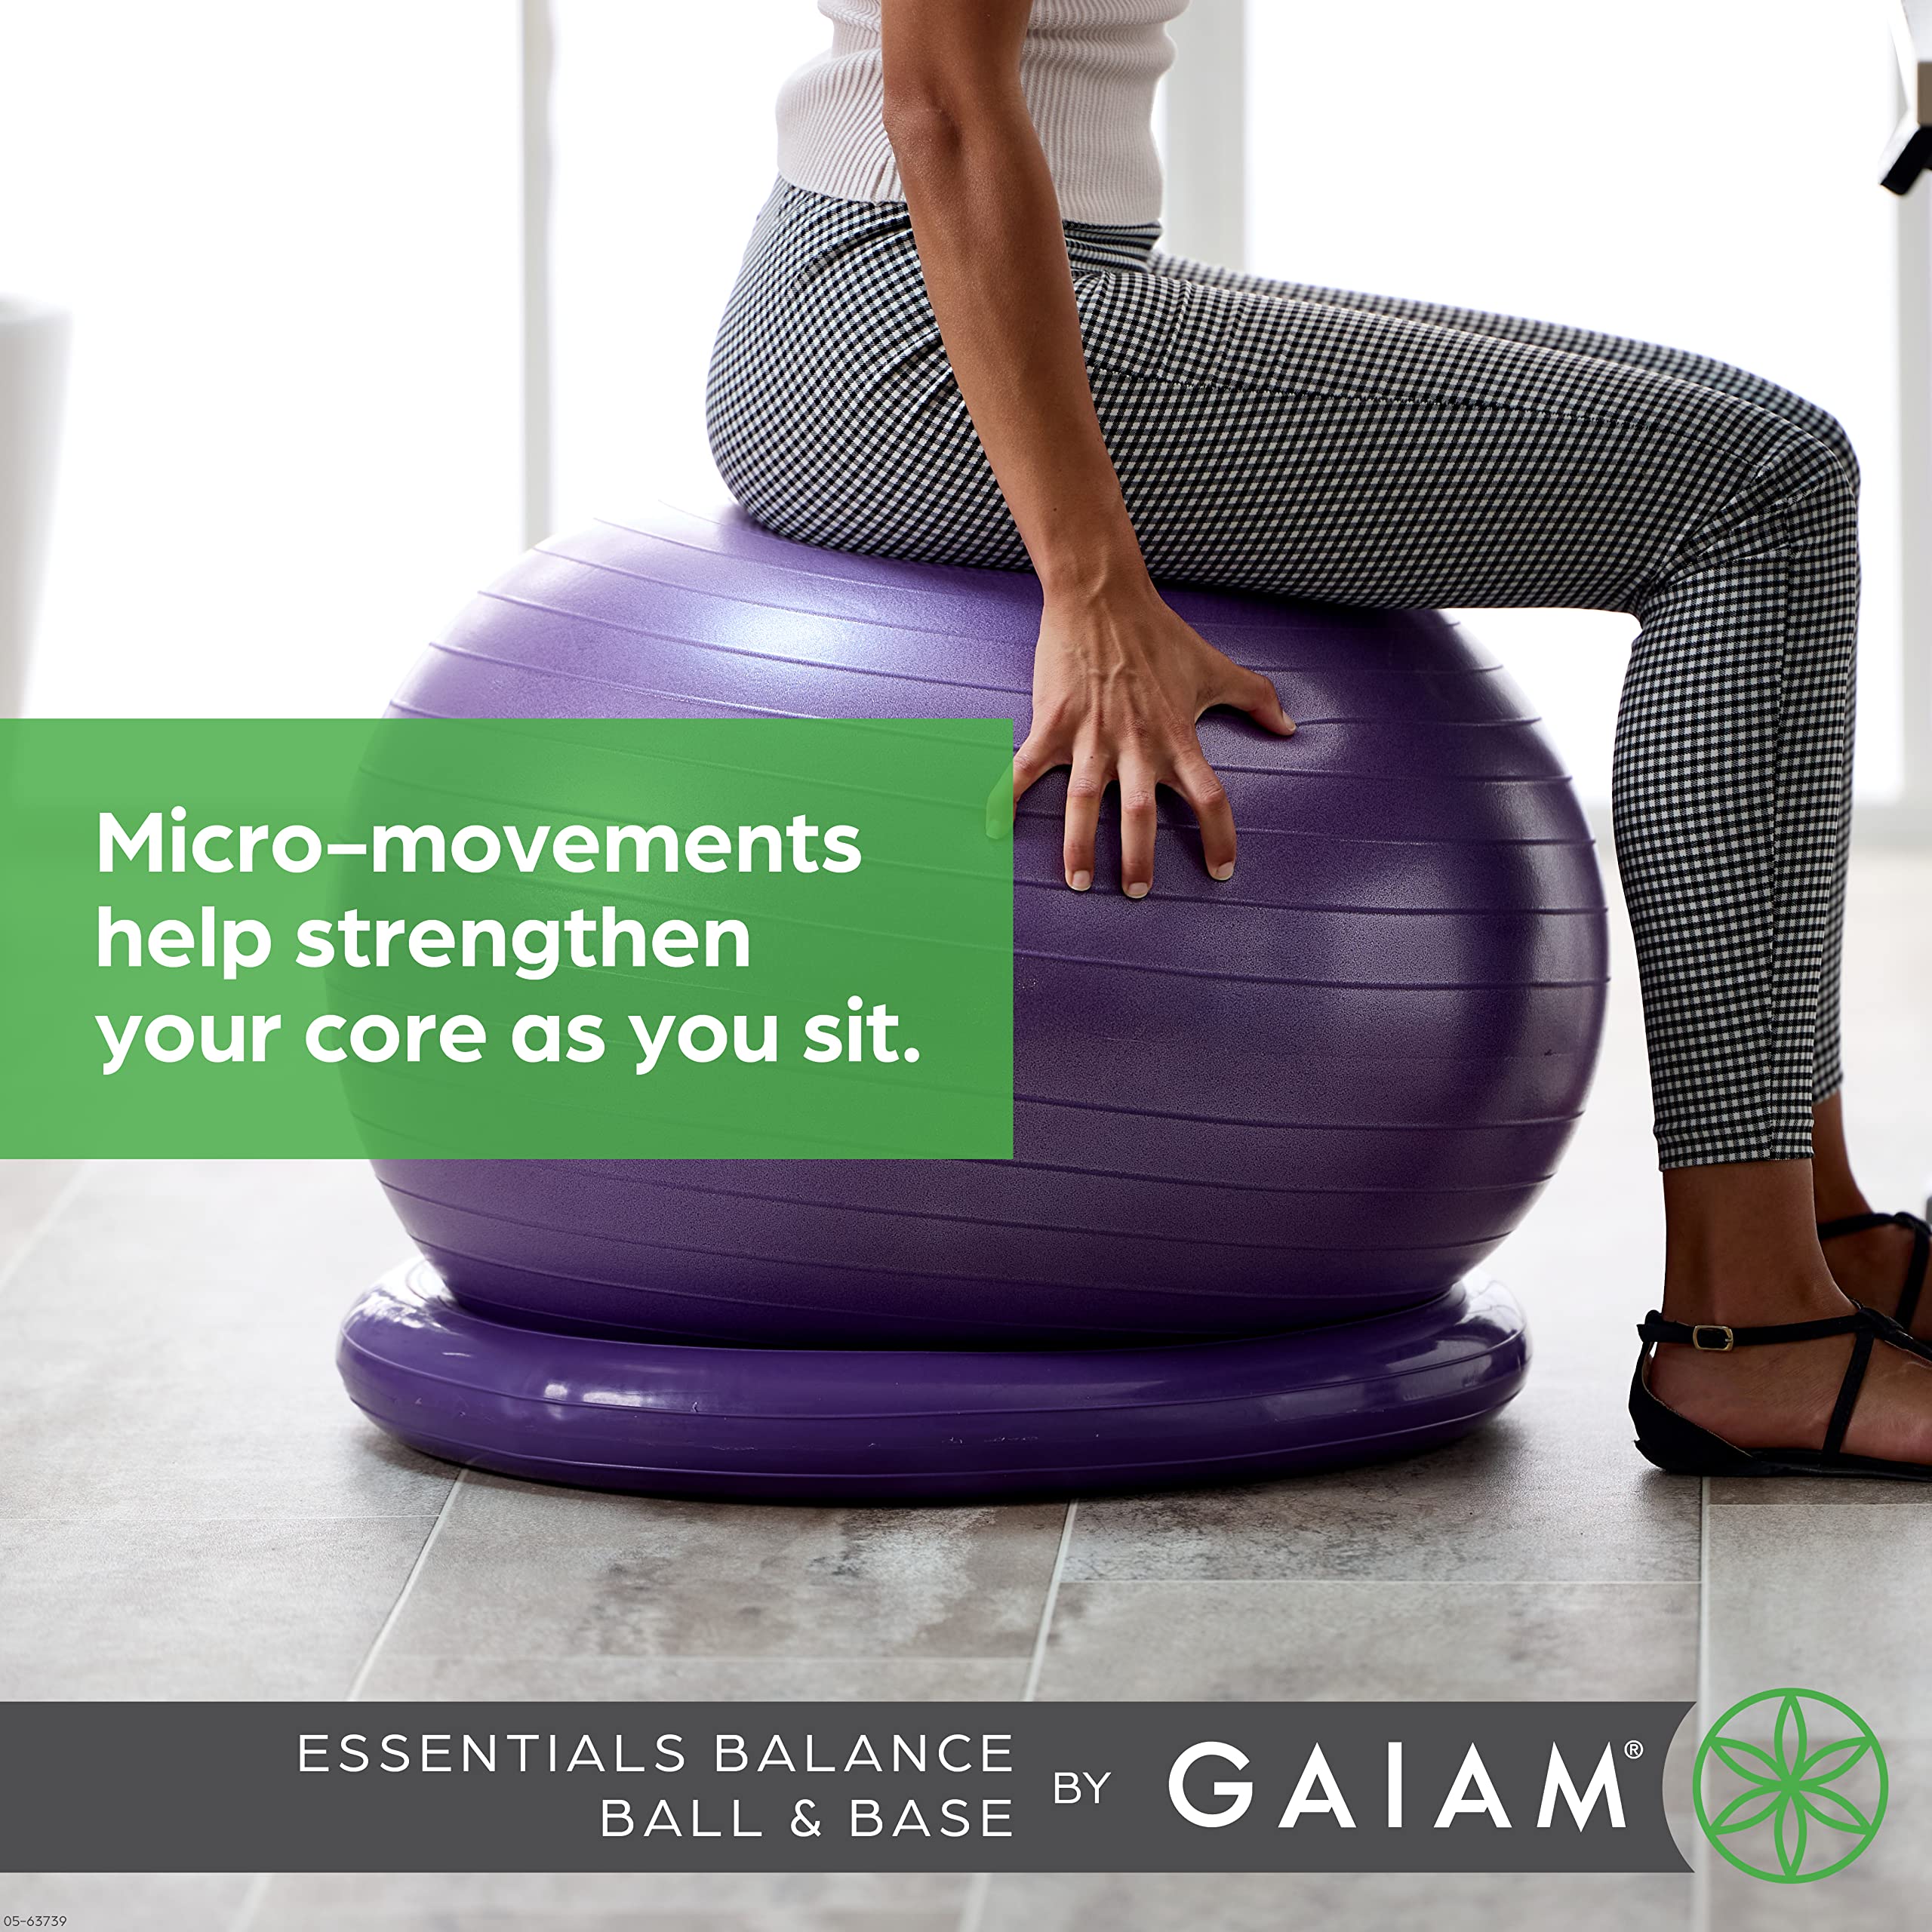 Gaiam Essentials Balance Ball & Base Kit, 65cm Yoga Ball Chair, Exercise Ball with Inflatable Ring Base for Home or Office Desk, Includes Air Pump - Navy